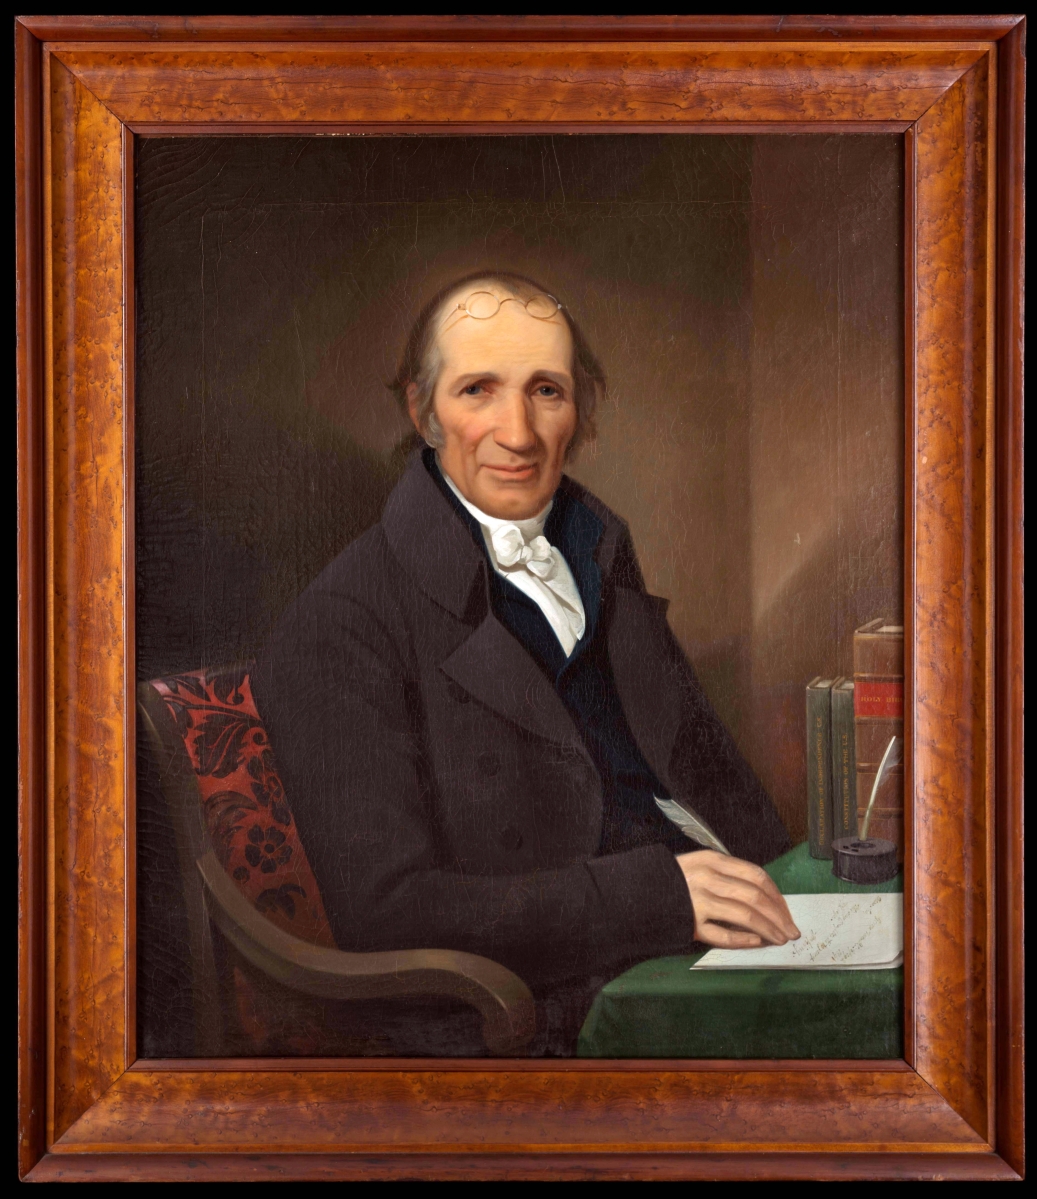 Portrait of William King, Jr, Washington, D.C., by James Alexander Simpson, 1841 oil on canvas. Museum purchase, Elaine and Don Bogus, Jerry Dalton, Elizabeth T. Gessley, Mary and Clinton Gilliland, Robert F. Grossman, Philip LeDuc, Marcia and Lawrence Long, Margaret Mathews, Margaret Beck Pritchard, Mark and Loretta Roman, and Community Foundation for Northern Virginia/The MOTSTA Fund.